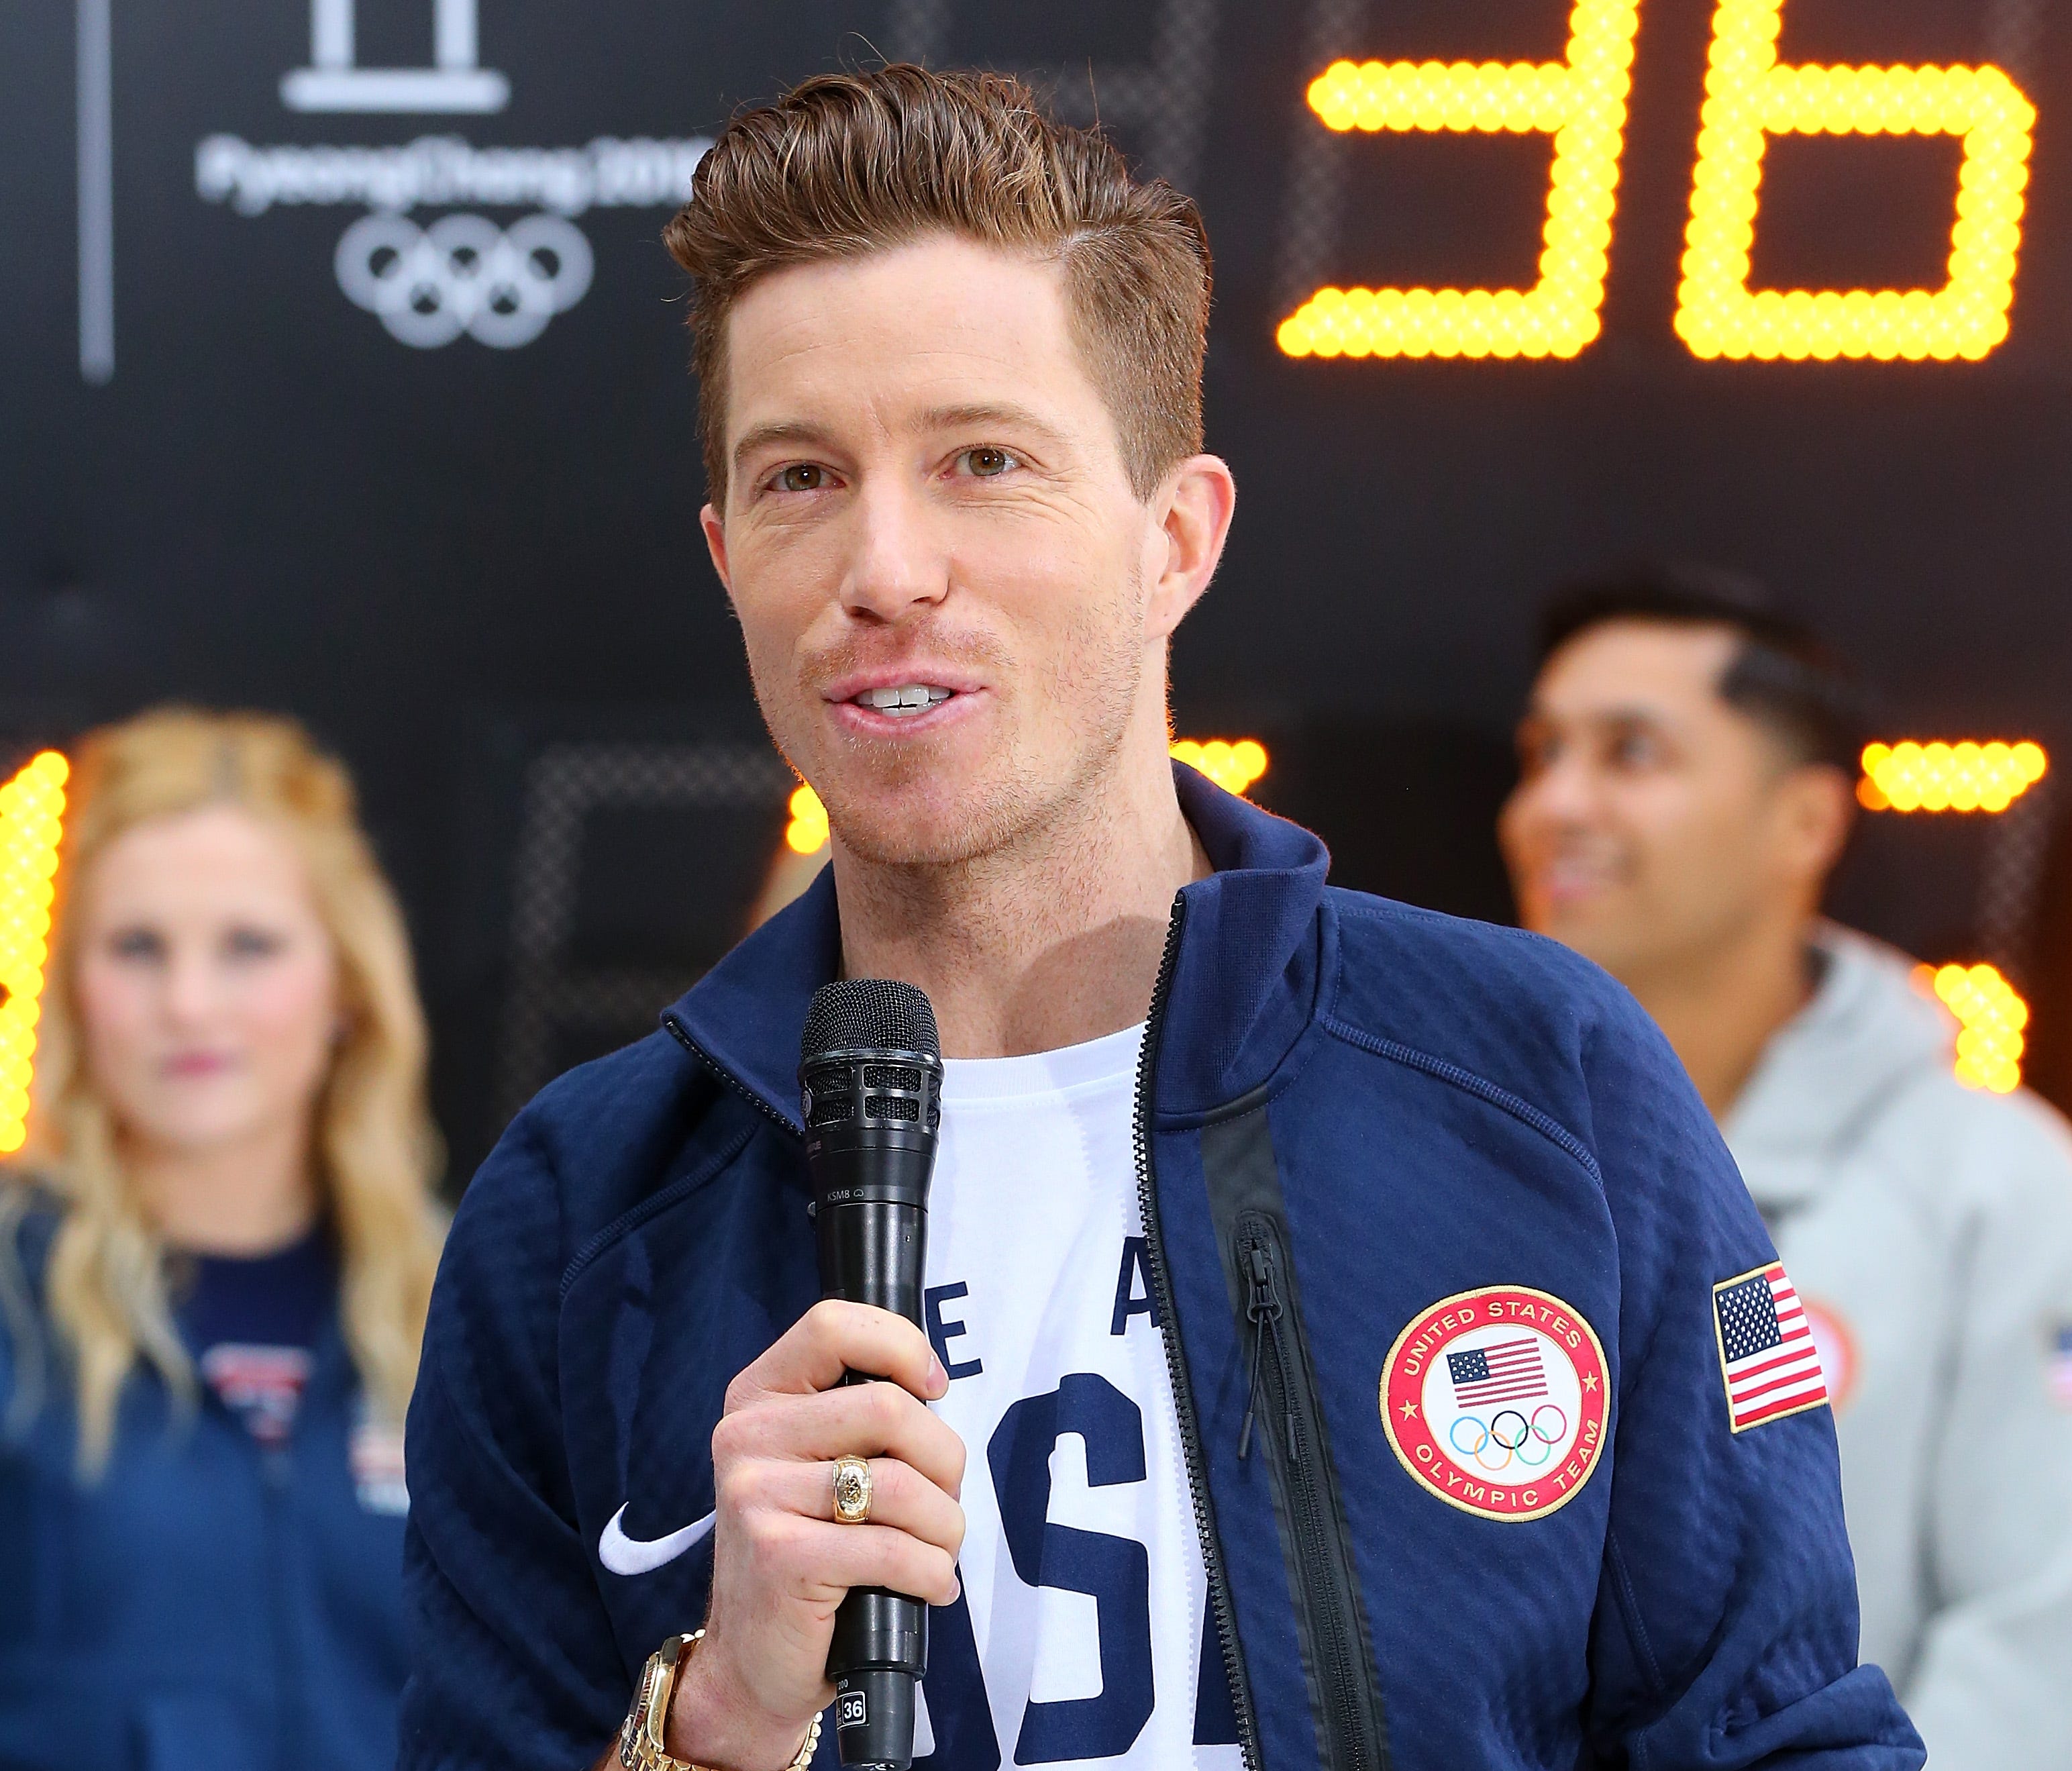 Team USA Olympic hopeful Shaun White is interviewed during NBC's TODAY Show on Feb. 8, 2017 in New York City.